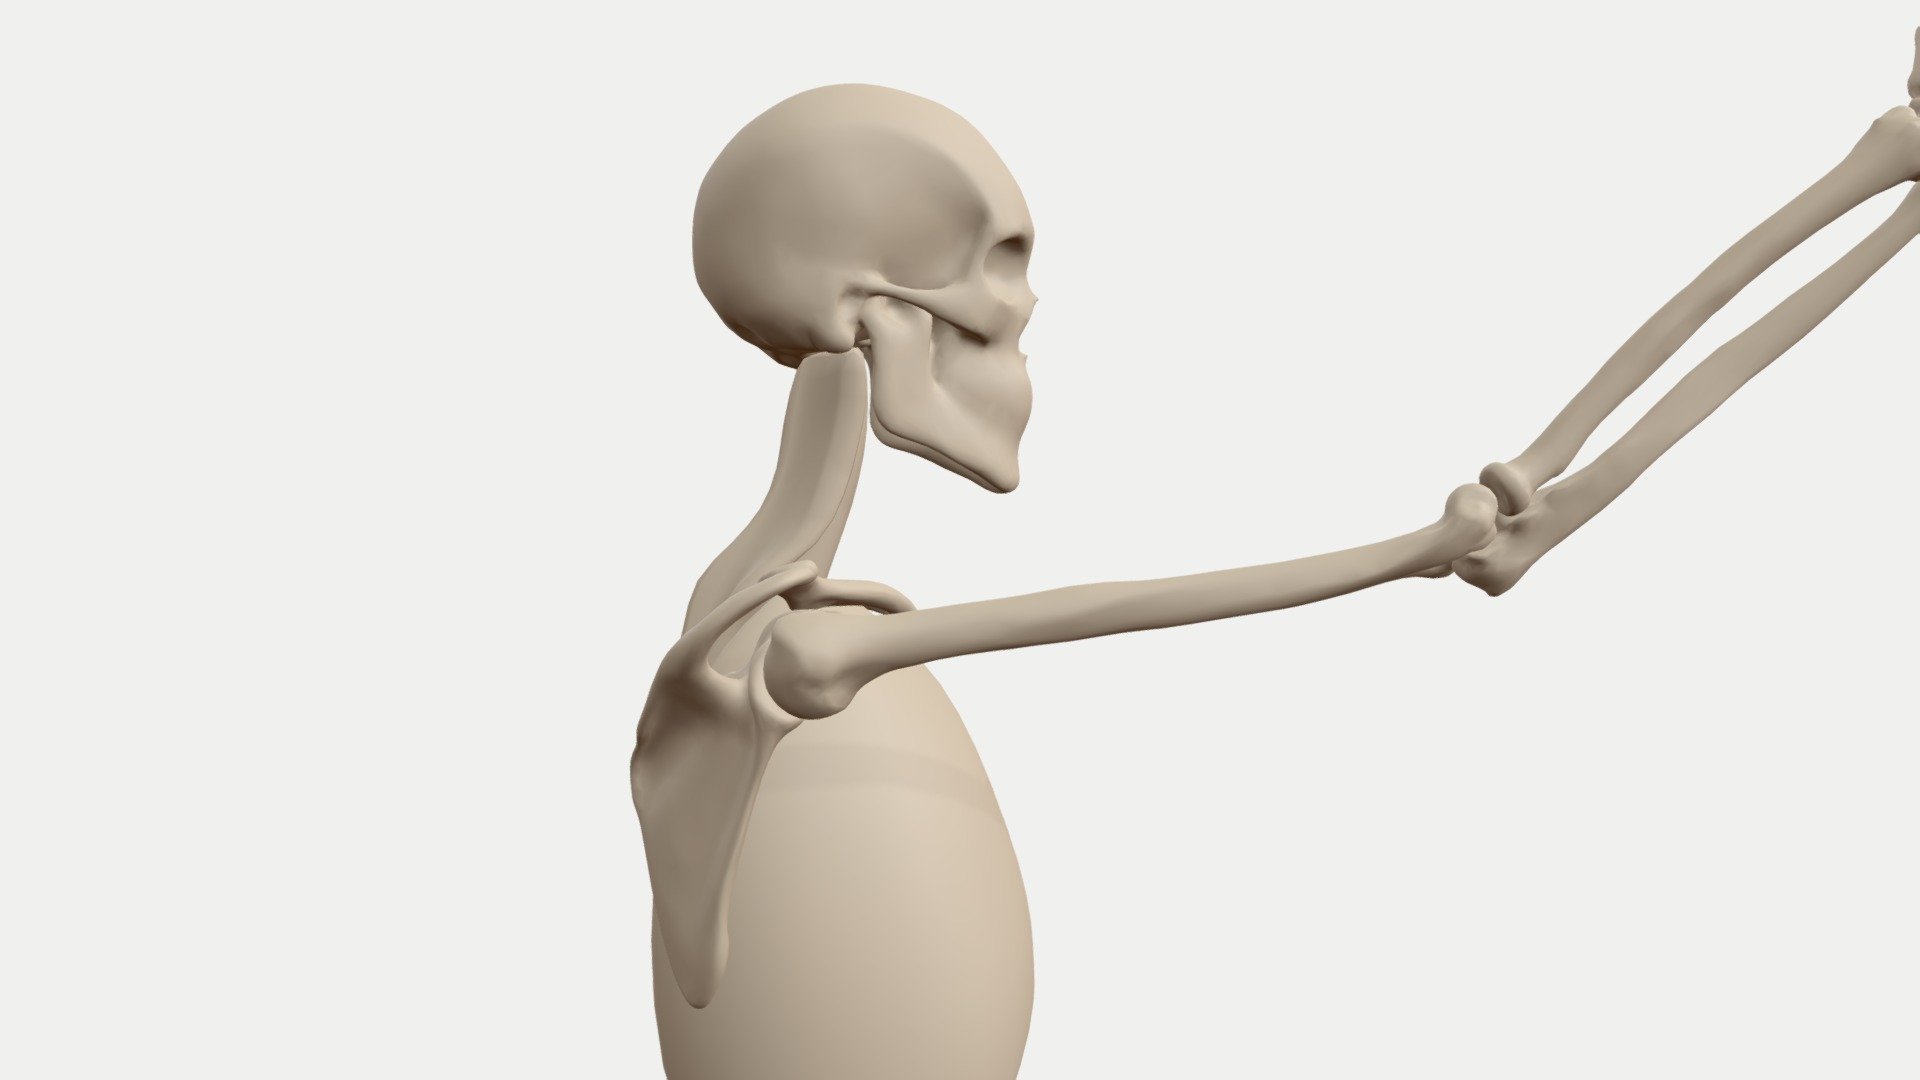 I did this animation as part of my series of blog posts on the movments of the shoulder.

You can read them here:
http://pearsetoomey.com/category/anatomy/ - shoulder flexion animated skeleton - 3D model by pearsetoomey 3d model